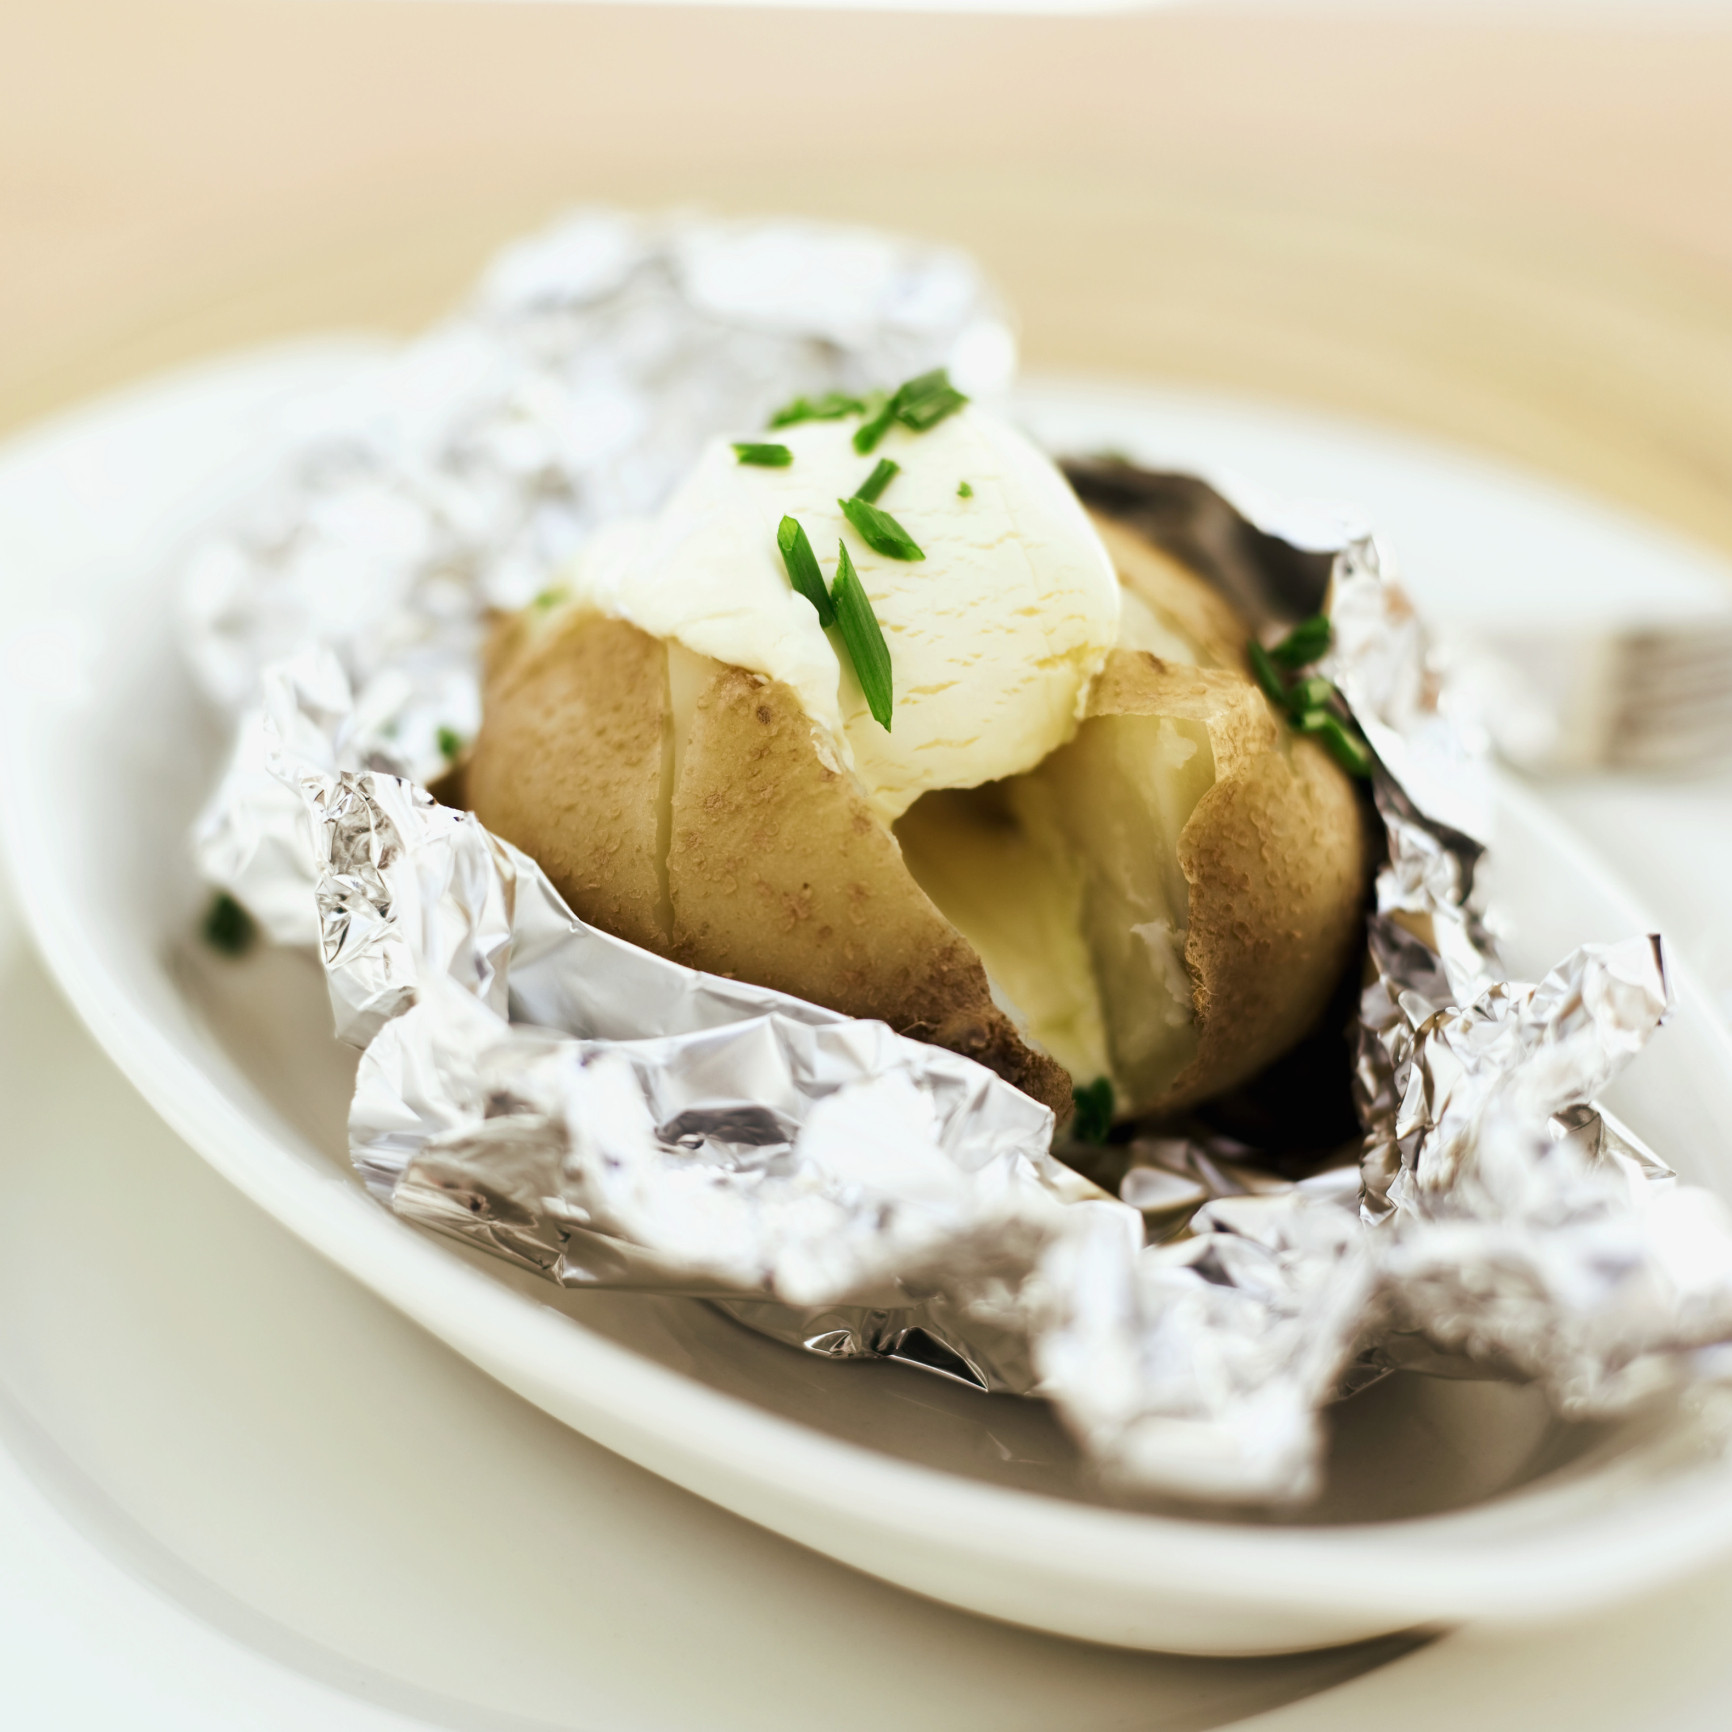 How Long To Microwave Baked Potato
 Cooking Time for Baked Potatoes Wrapped in Foil